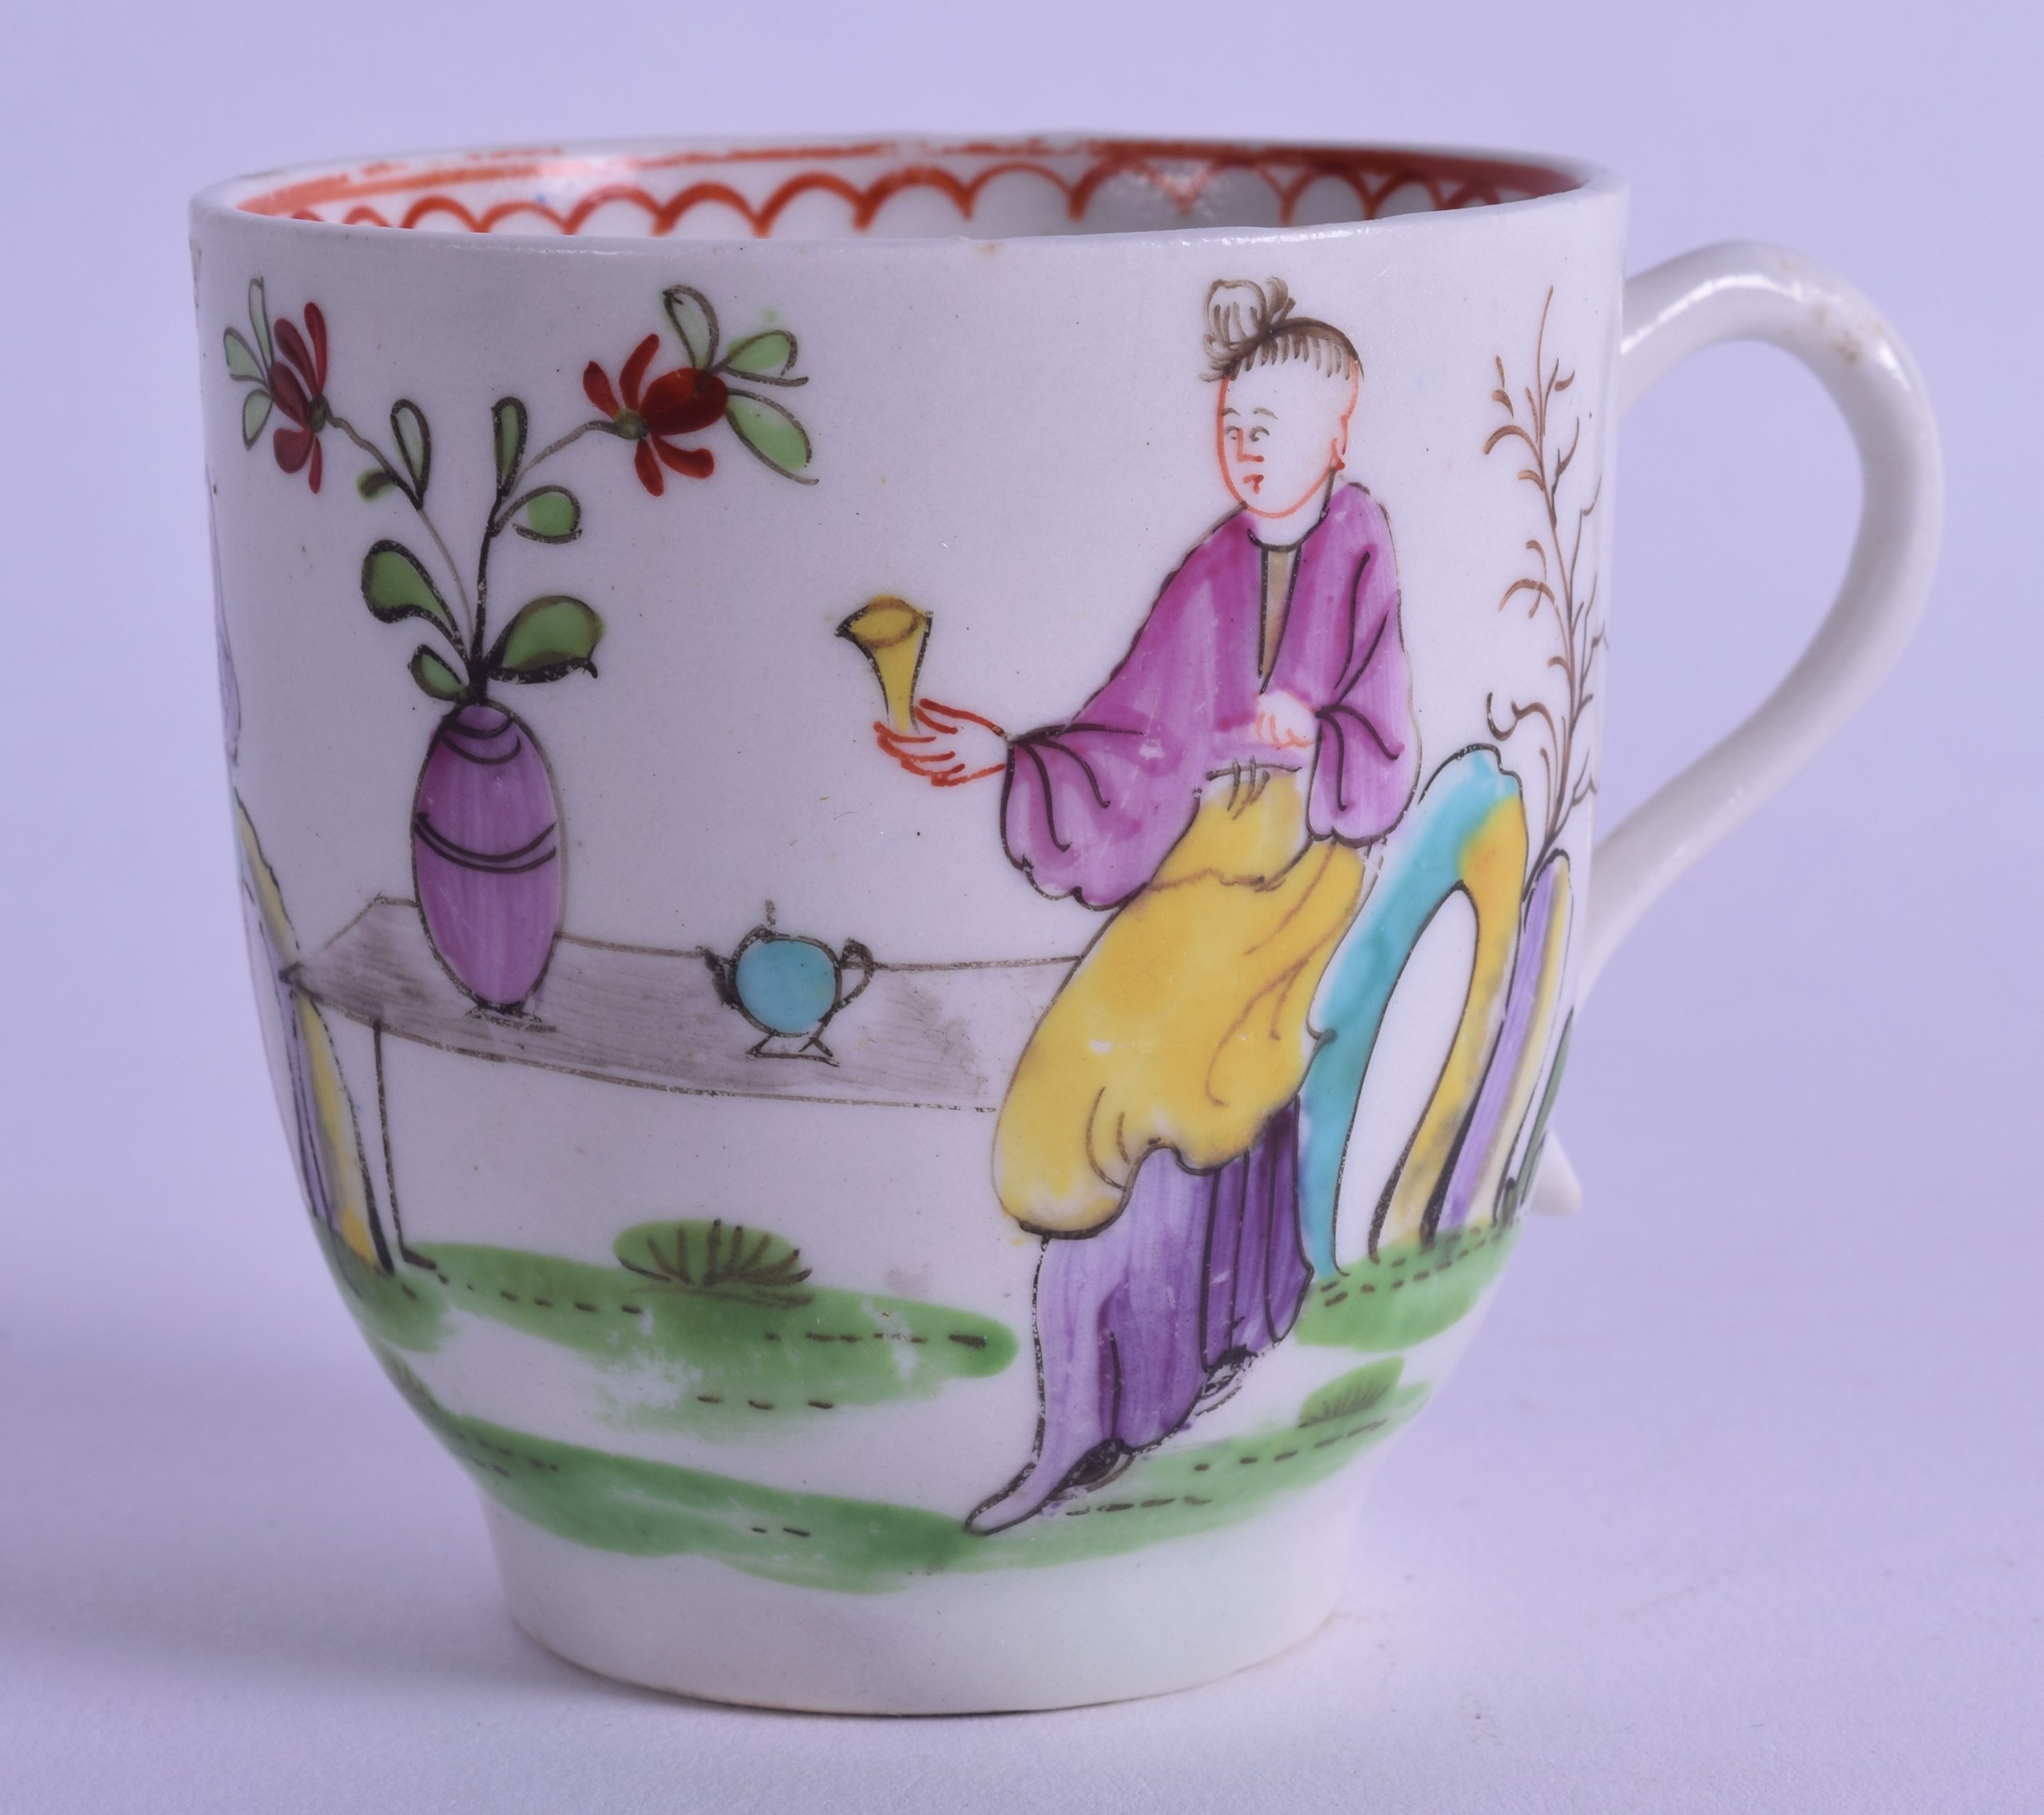 18th c. Lowestoft early coffee cup painted with two oriental ladies and a bird in a tree.